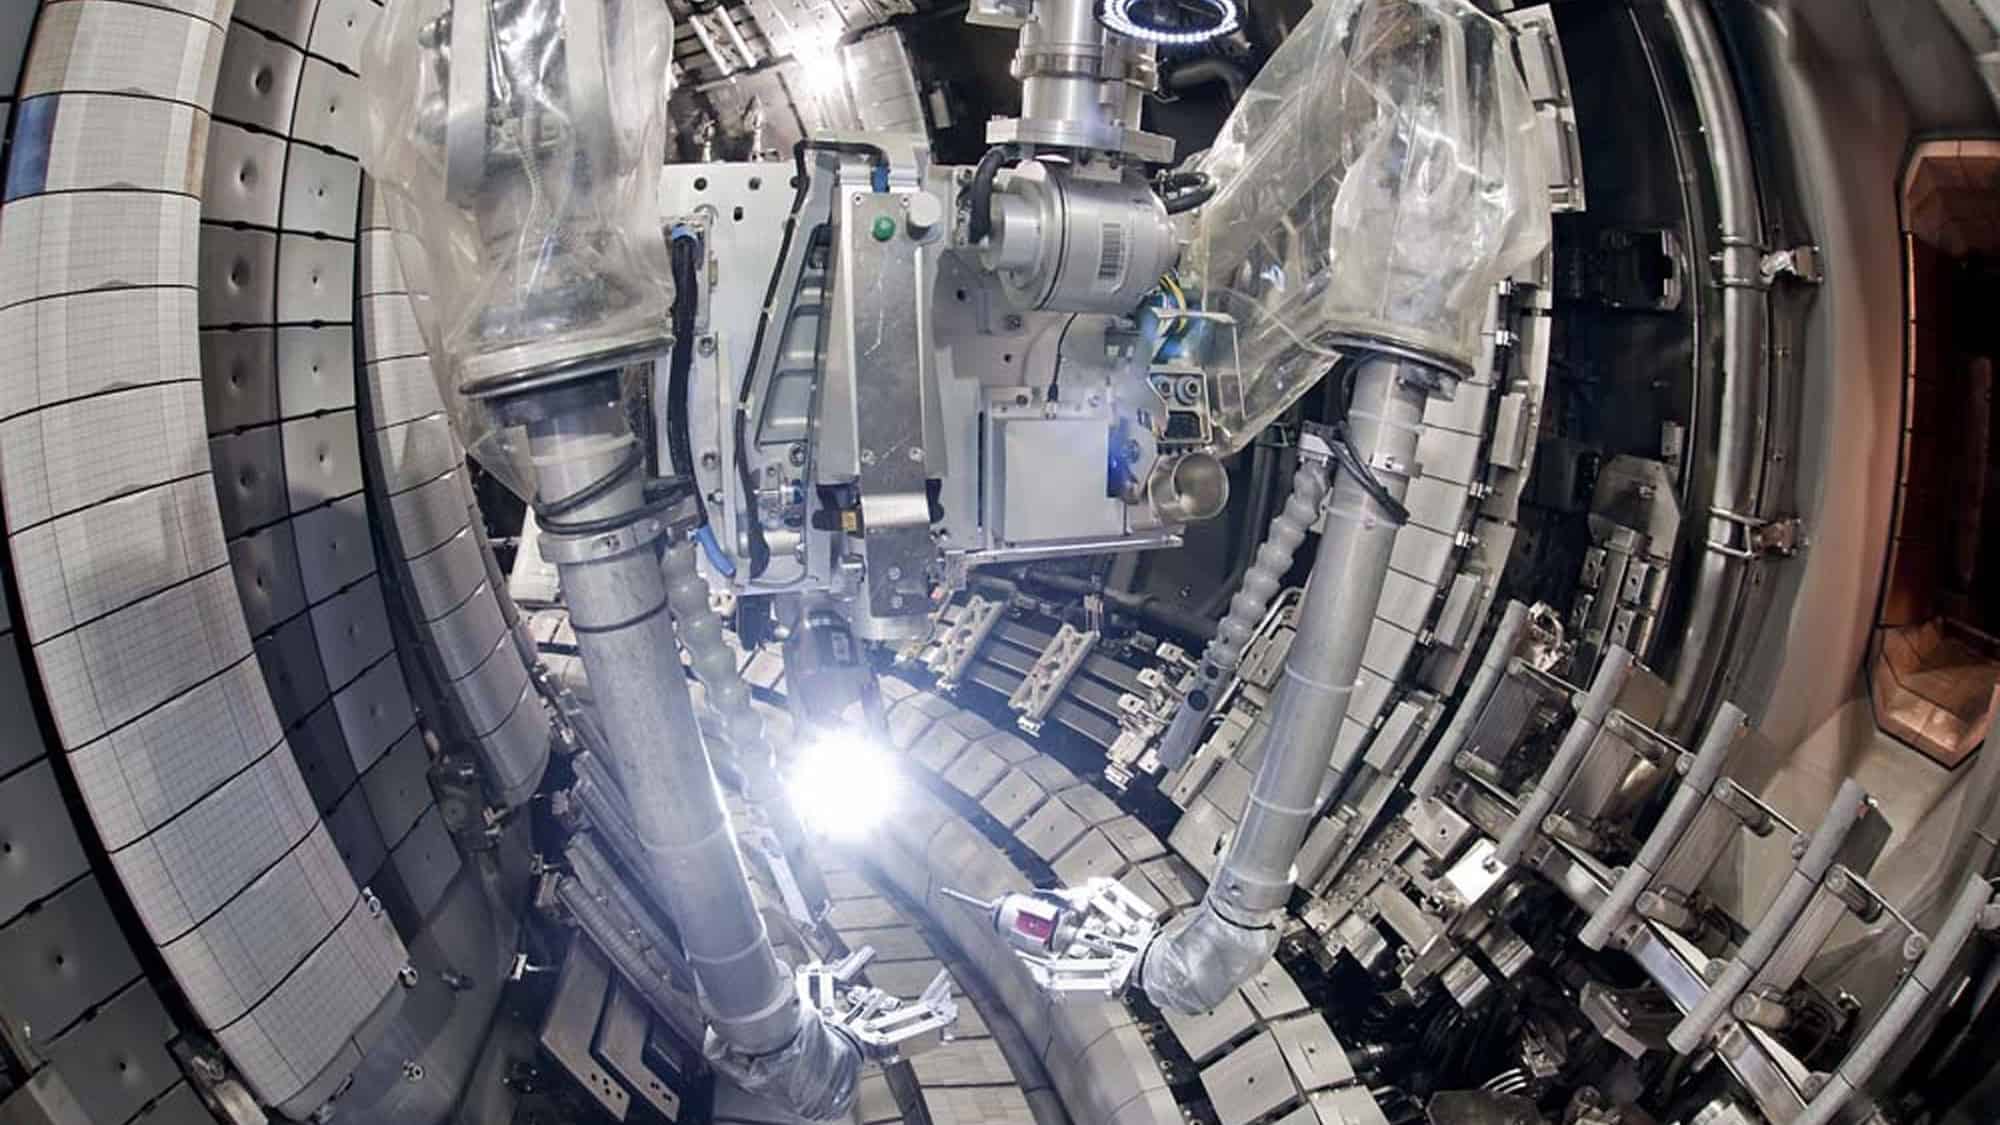 JET’s document end result and the search for fusion power – Physics World